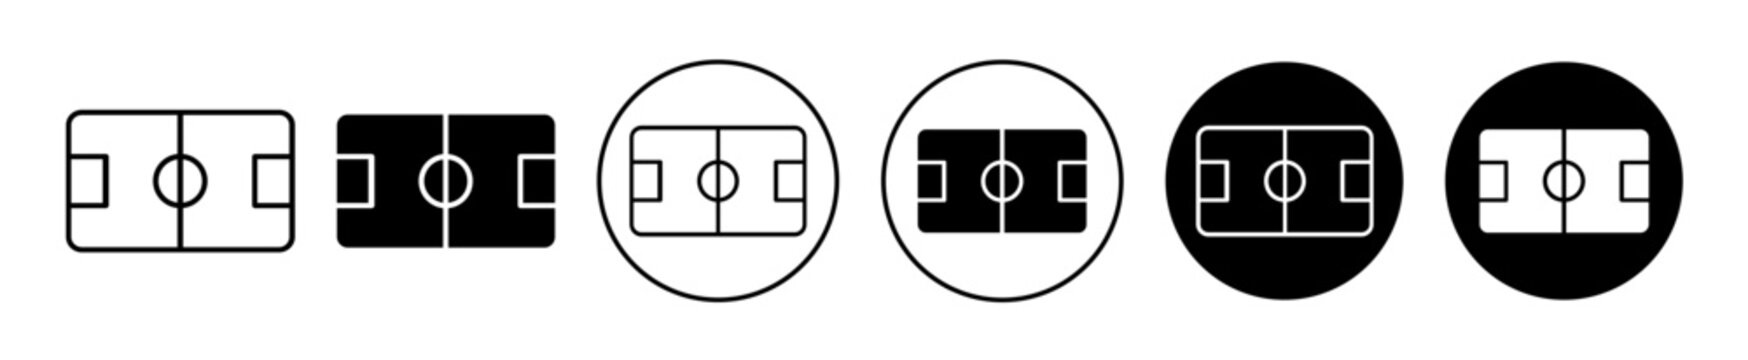 Football field icon set. soccer sport play pitch area vector symbol in black filled and outlined style.